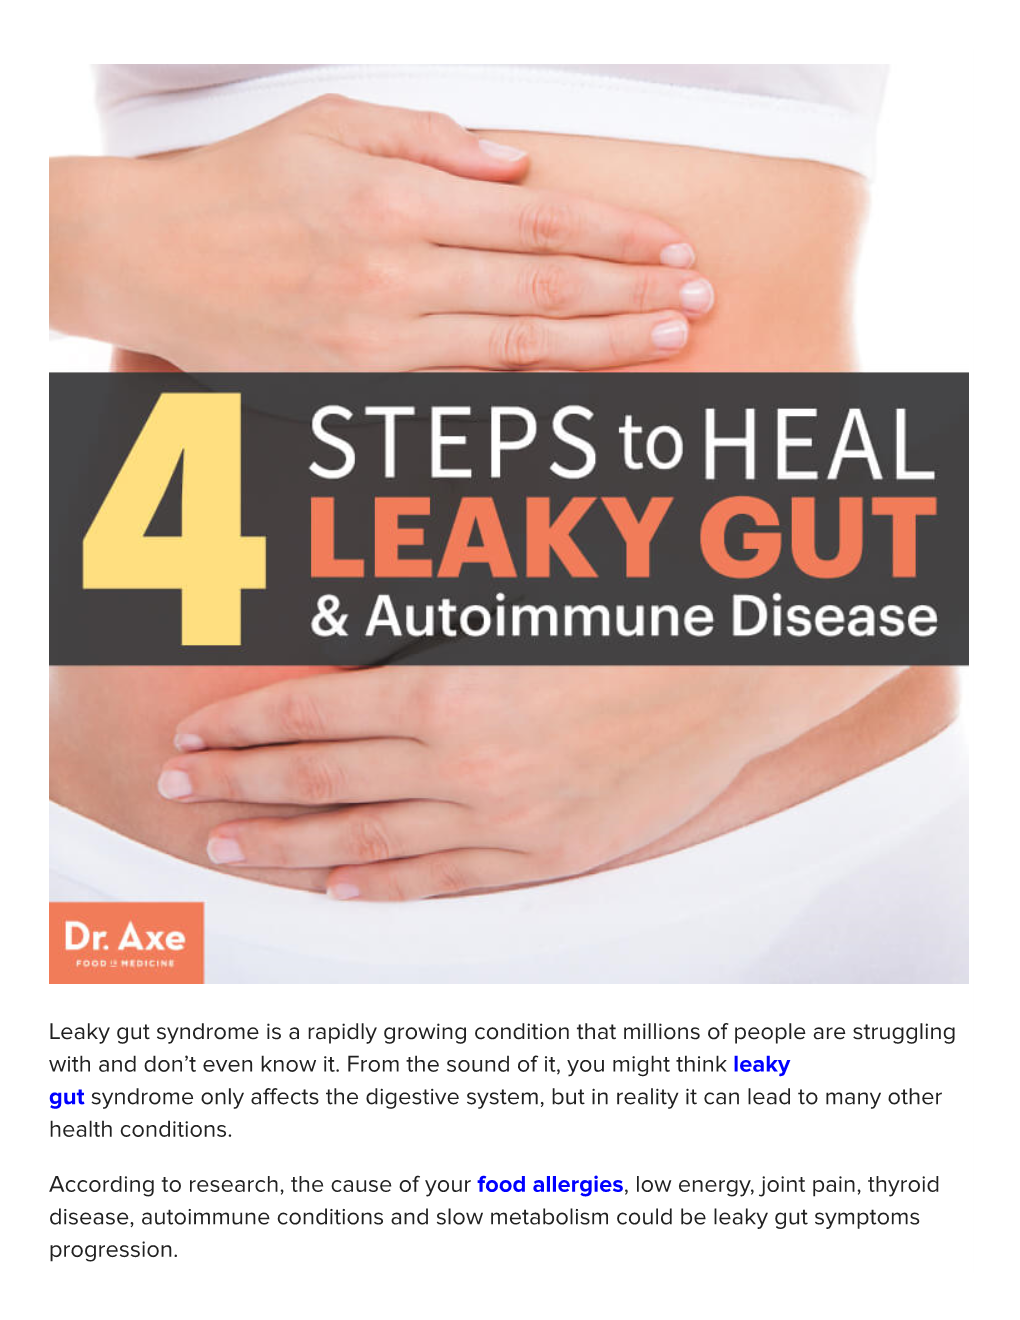 Leaky Gut Syndrome Is a Rapidly Growing Condition That Millions of People Are Struggling with and Don’T Even Know It